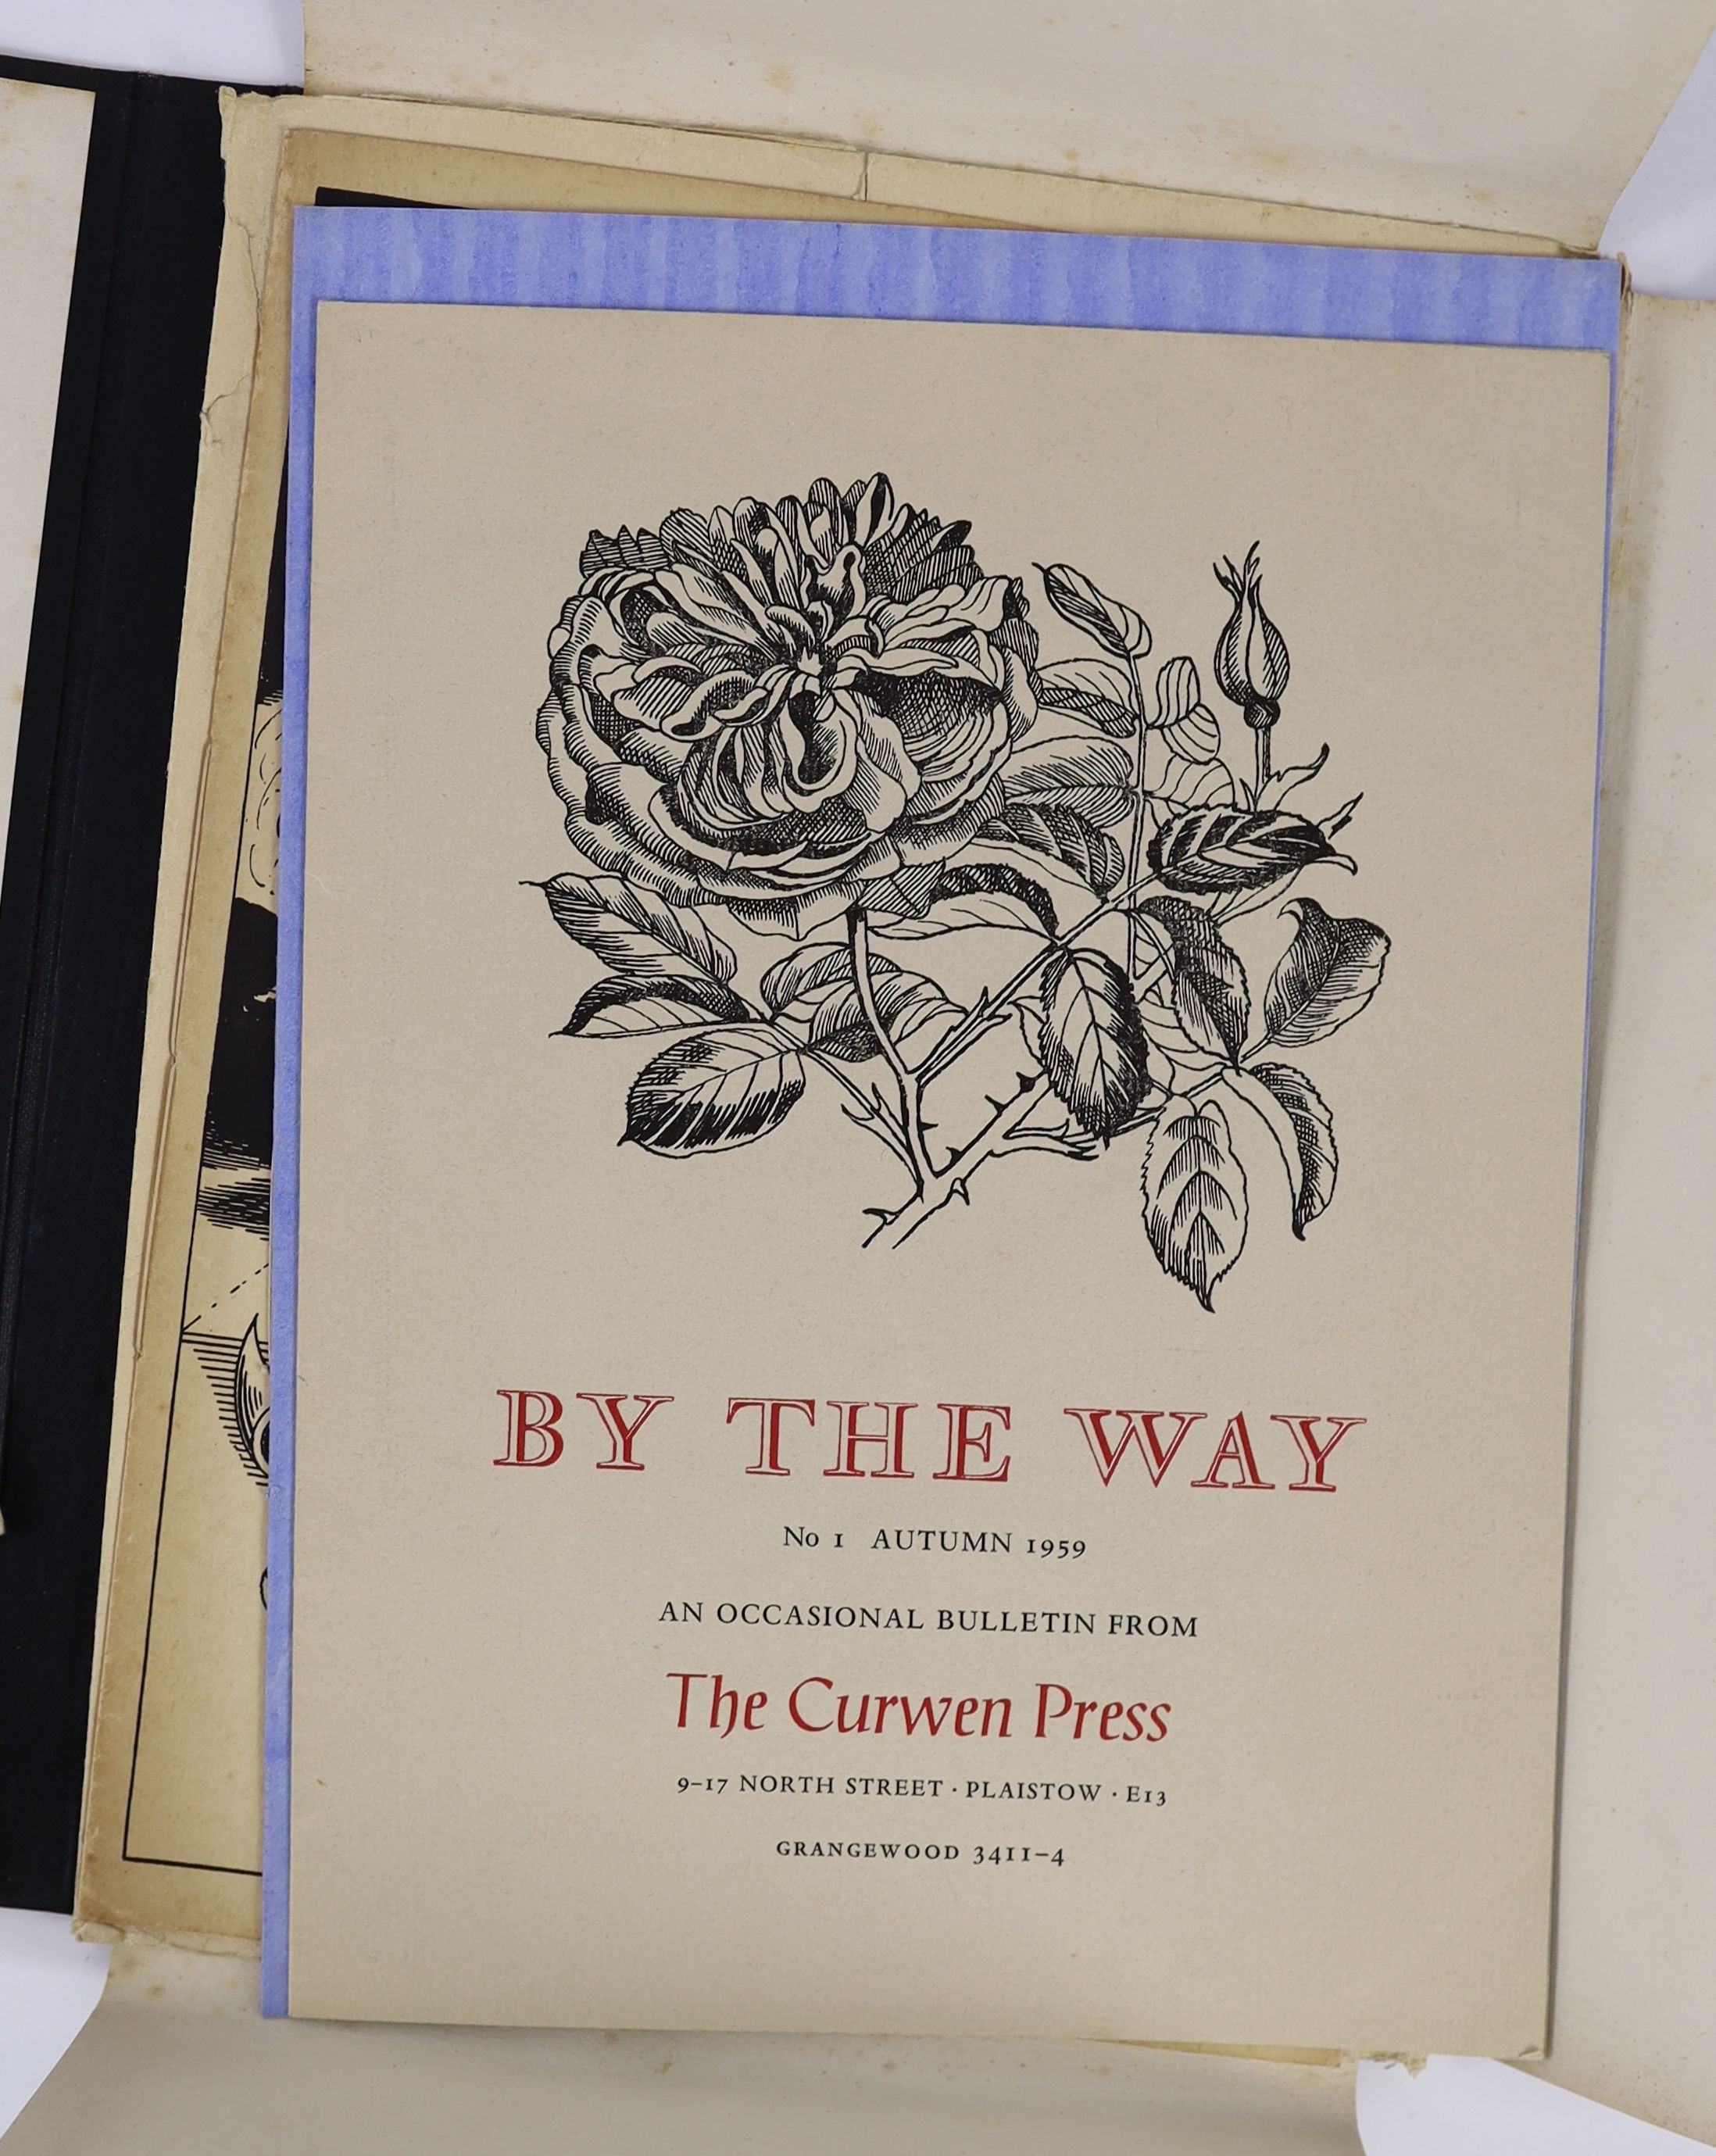 Various [The Curwen Press] - The Curwen Press News-Letter. 1st ed. 15 vols of 16 (lacking no.2). Adorned with numerous illustrations throughout, many coloured and some folding sections. Publishers illustrated paper cover